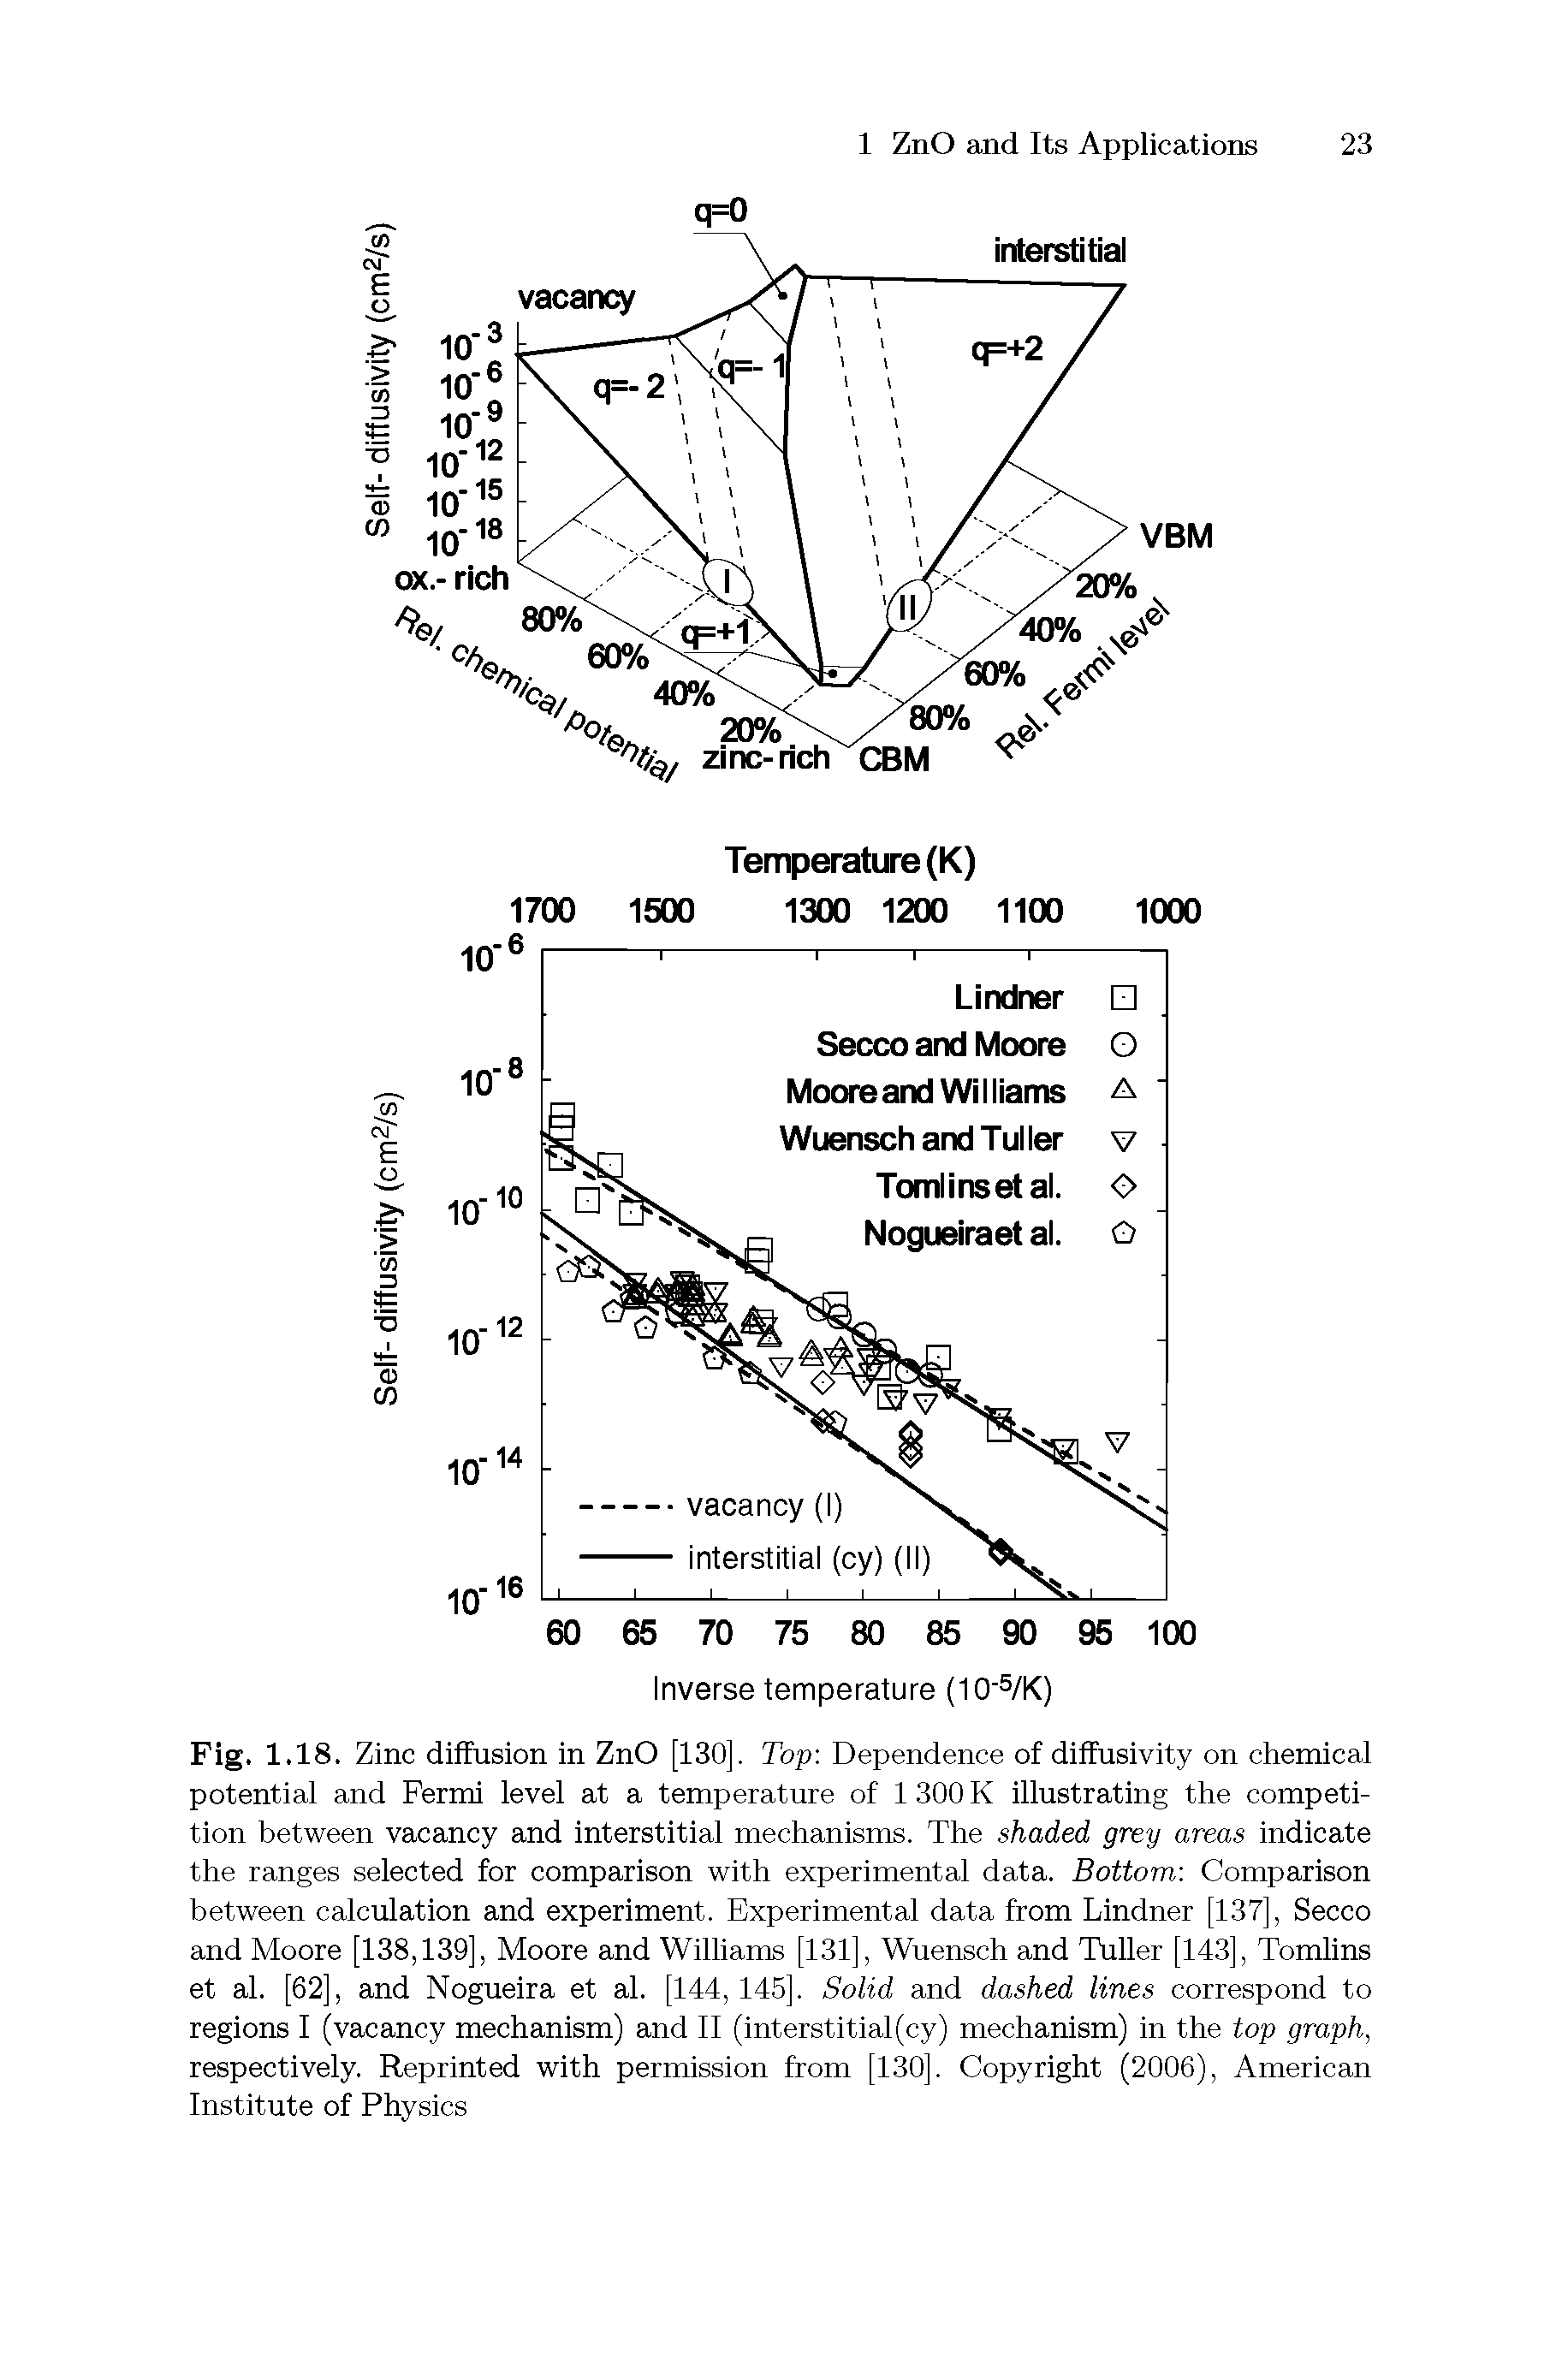 Fig. 1.18. Zinc diffusion in ZnO [130]. Top Dependence of diffusivity on chemical potential and Fermi level at a temperature of 1 300 K illustrating the competition between vacancy and interstitial mechanisms. The shaded grey areas indicate the ranges selected for comparison with experimental data. Bottom Comparison between calculation and experiment. Experimental data from Lindner [137], Secco and Moore [138,139], Moore and Williams [131], Wuensch and Tuller [143], Tomlins et al. [62], and Nogueira et al. [144,145]. Solid and dashed lines correspond to regions I (vacancy mechanism) and II (interstitial(cy) mechanism) in the top graph, respectively. Reprinted with permission from [130]. Copyright (2006), American Institute of Physics...